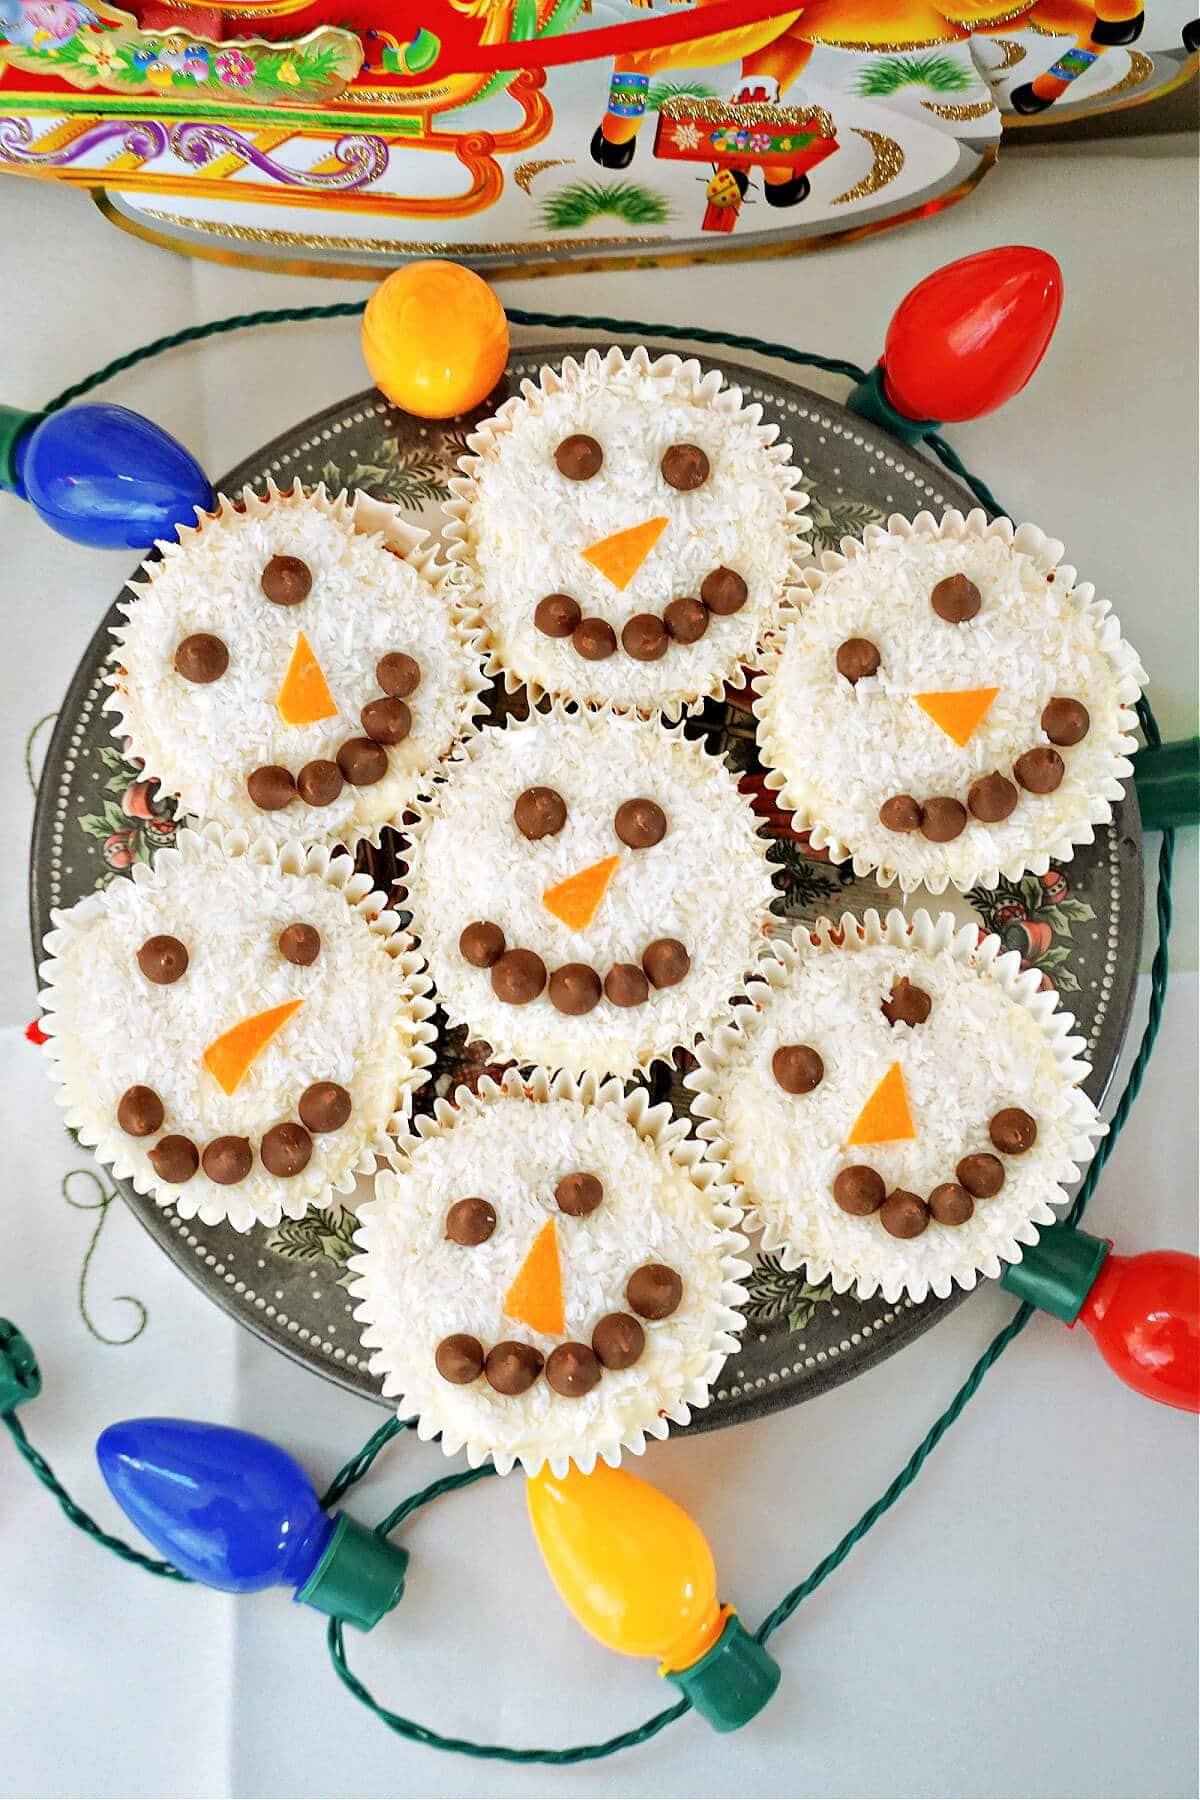 Overhead shoot of a plate with 7 snowman cupcakes.